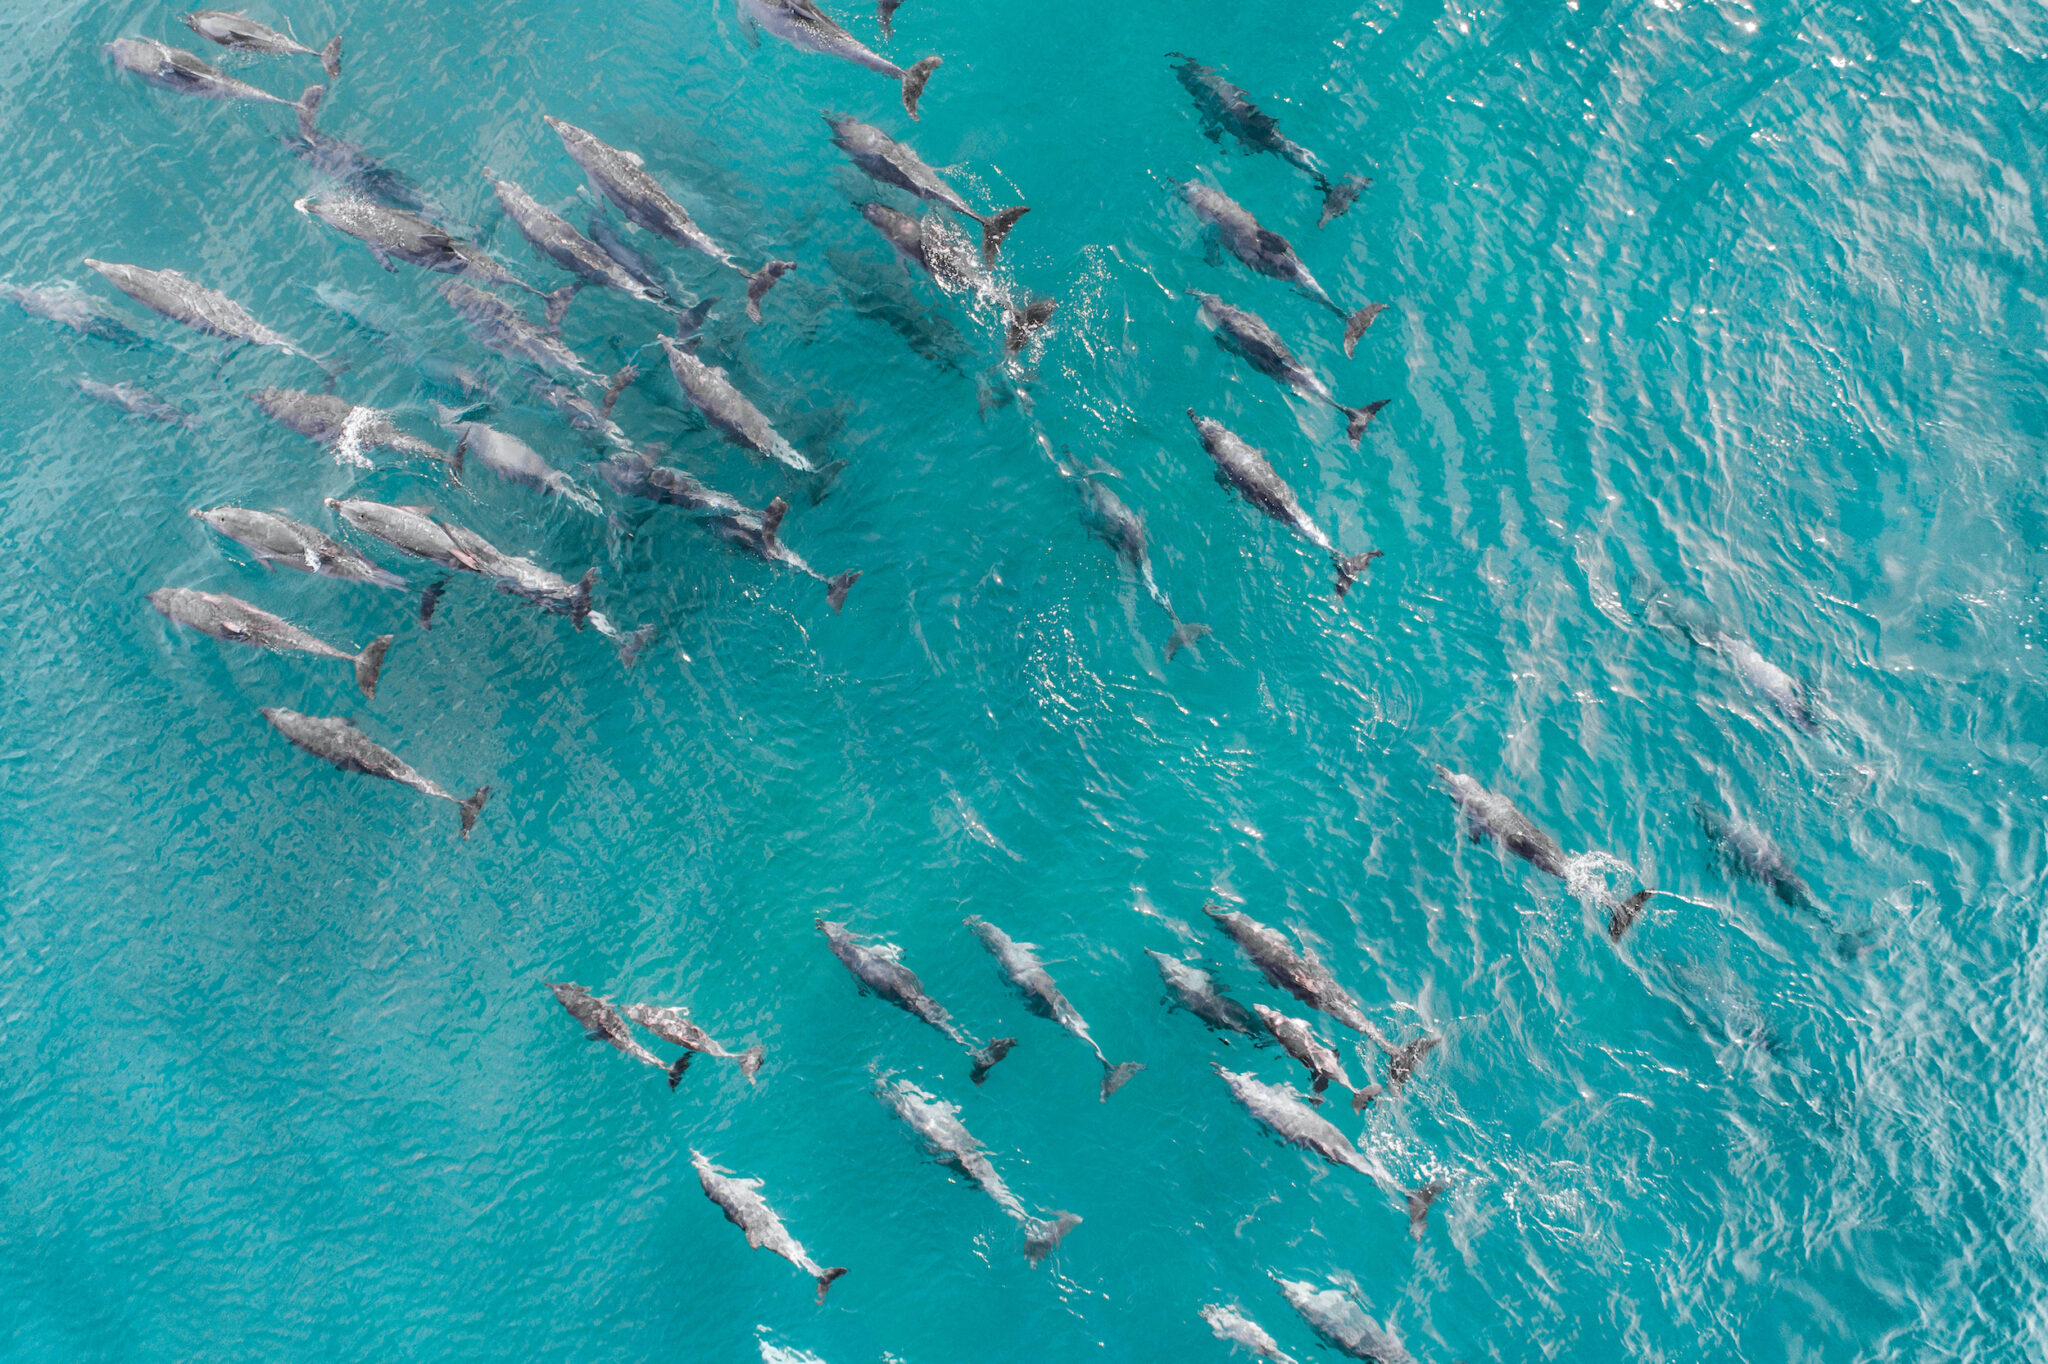 A large pod of dolphins, which could easily outnumber a solitary shark and is why sharks are often thought to fear dolphins